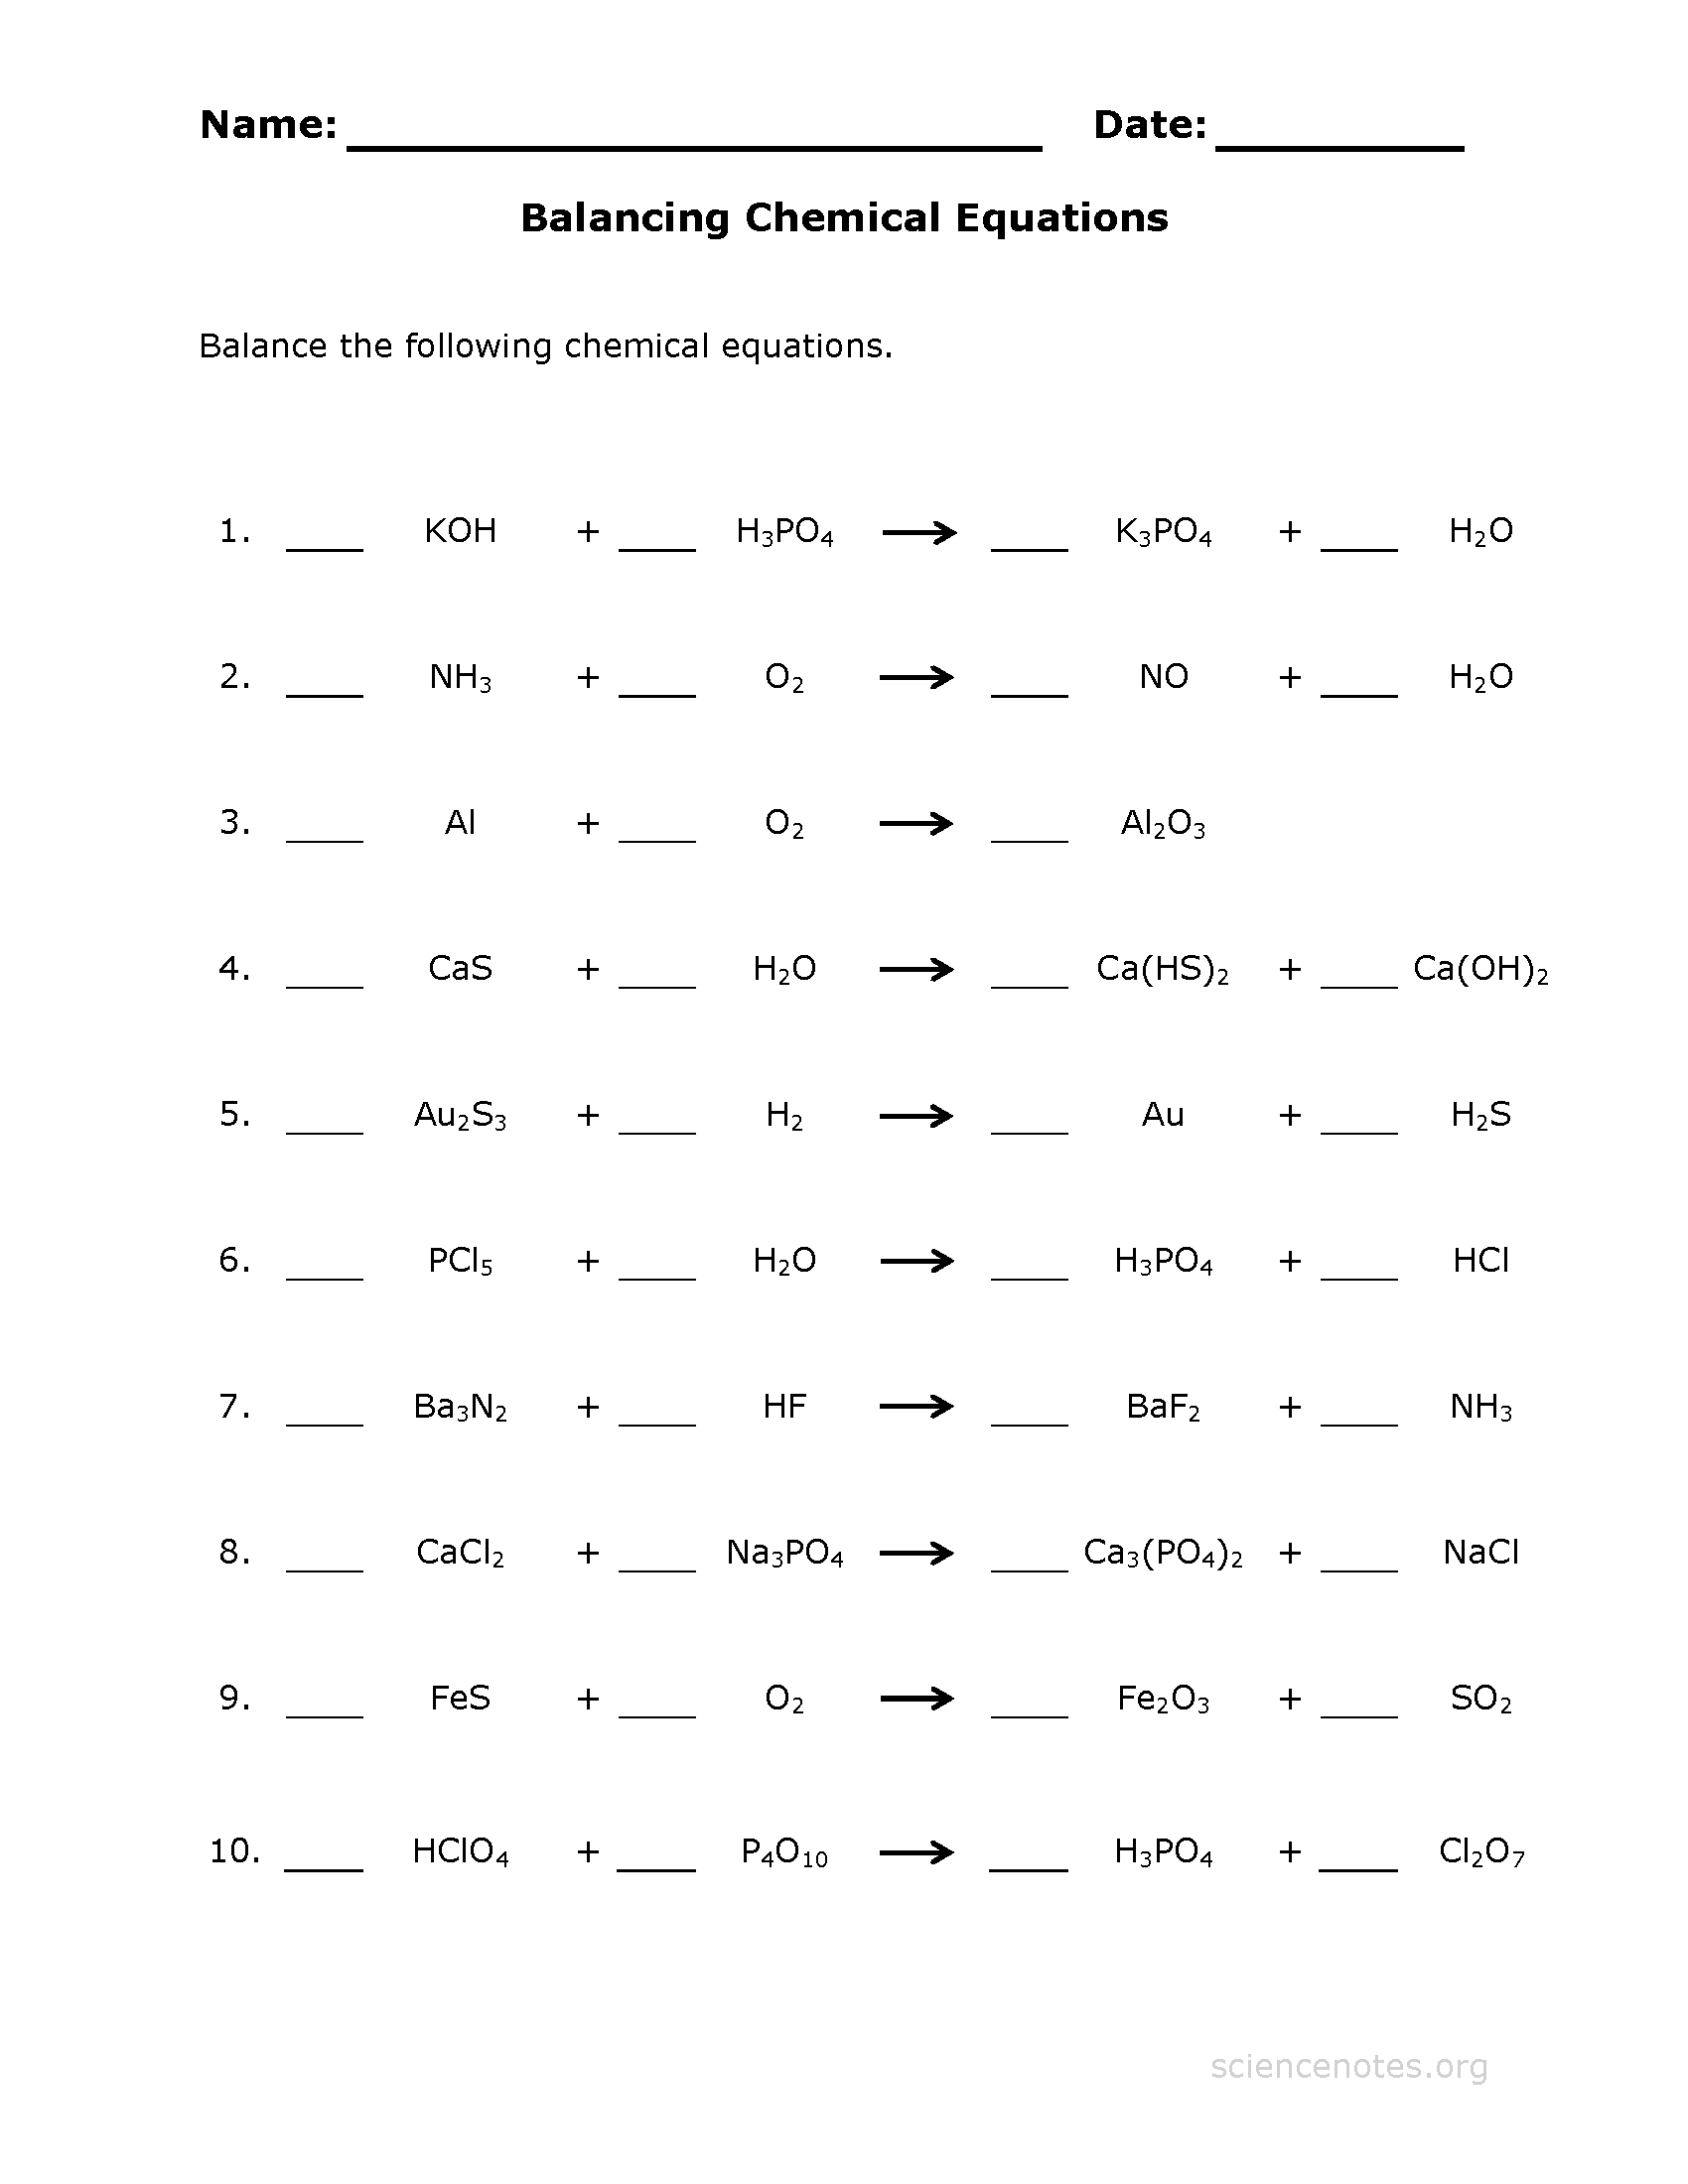 Balancing Chemical Equations Practice Worksheet With Answers How To